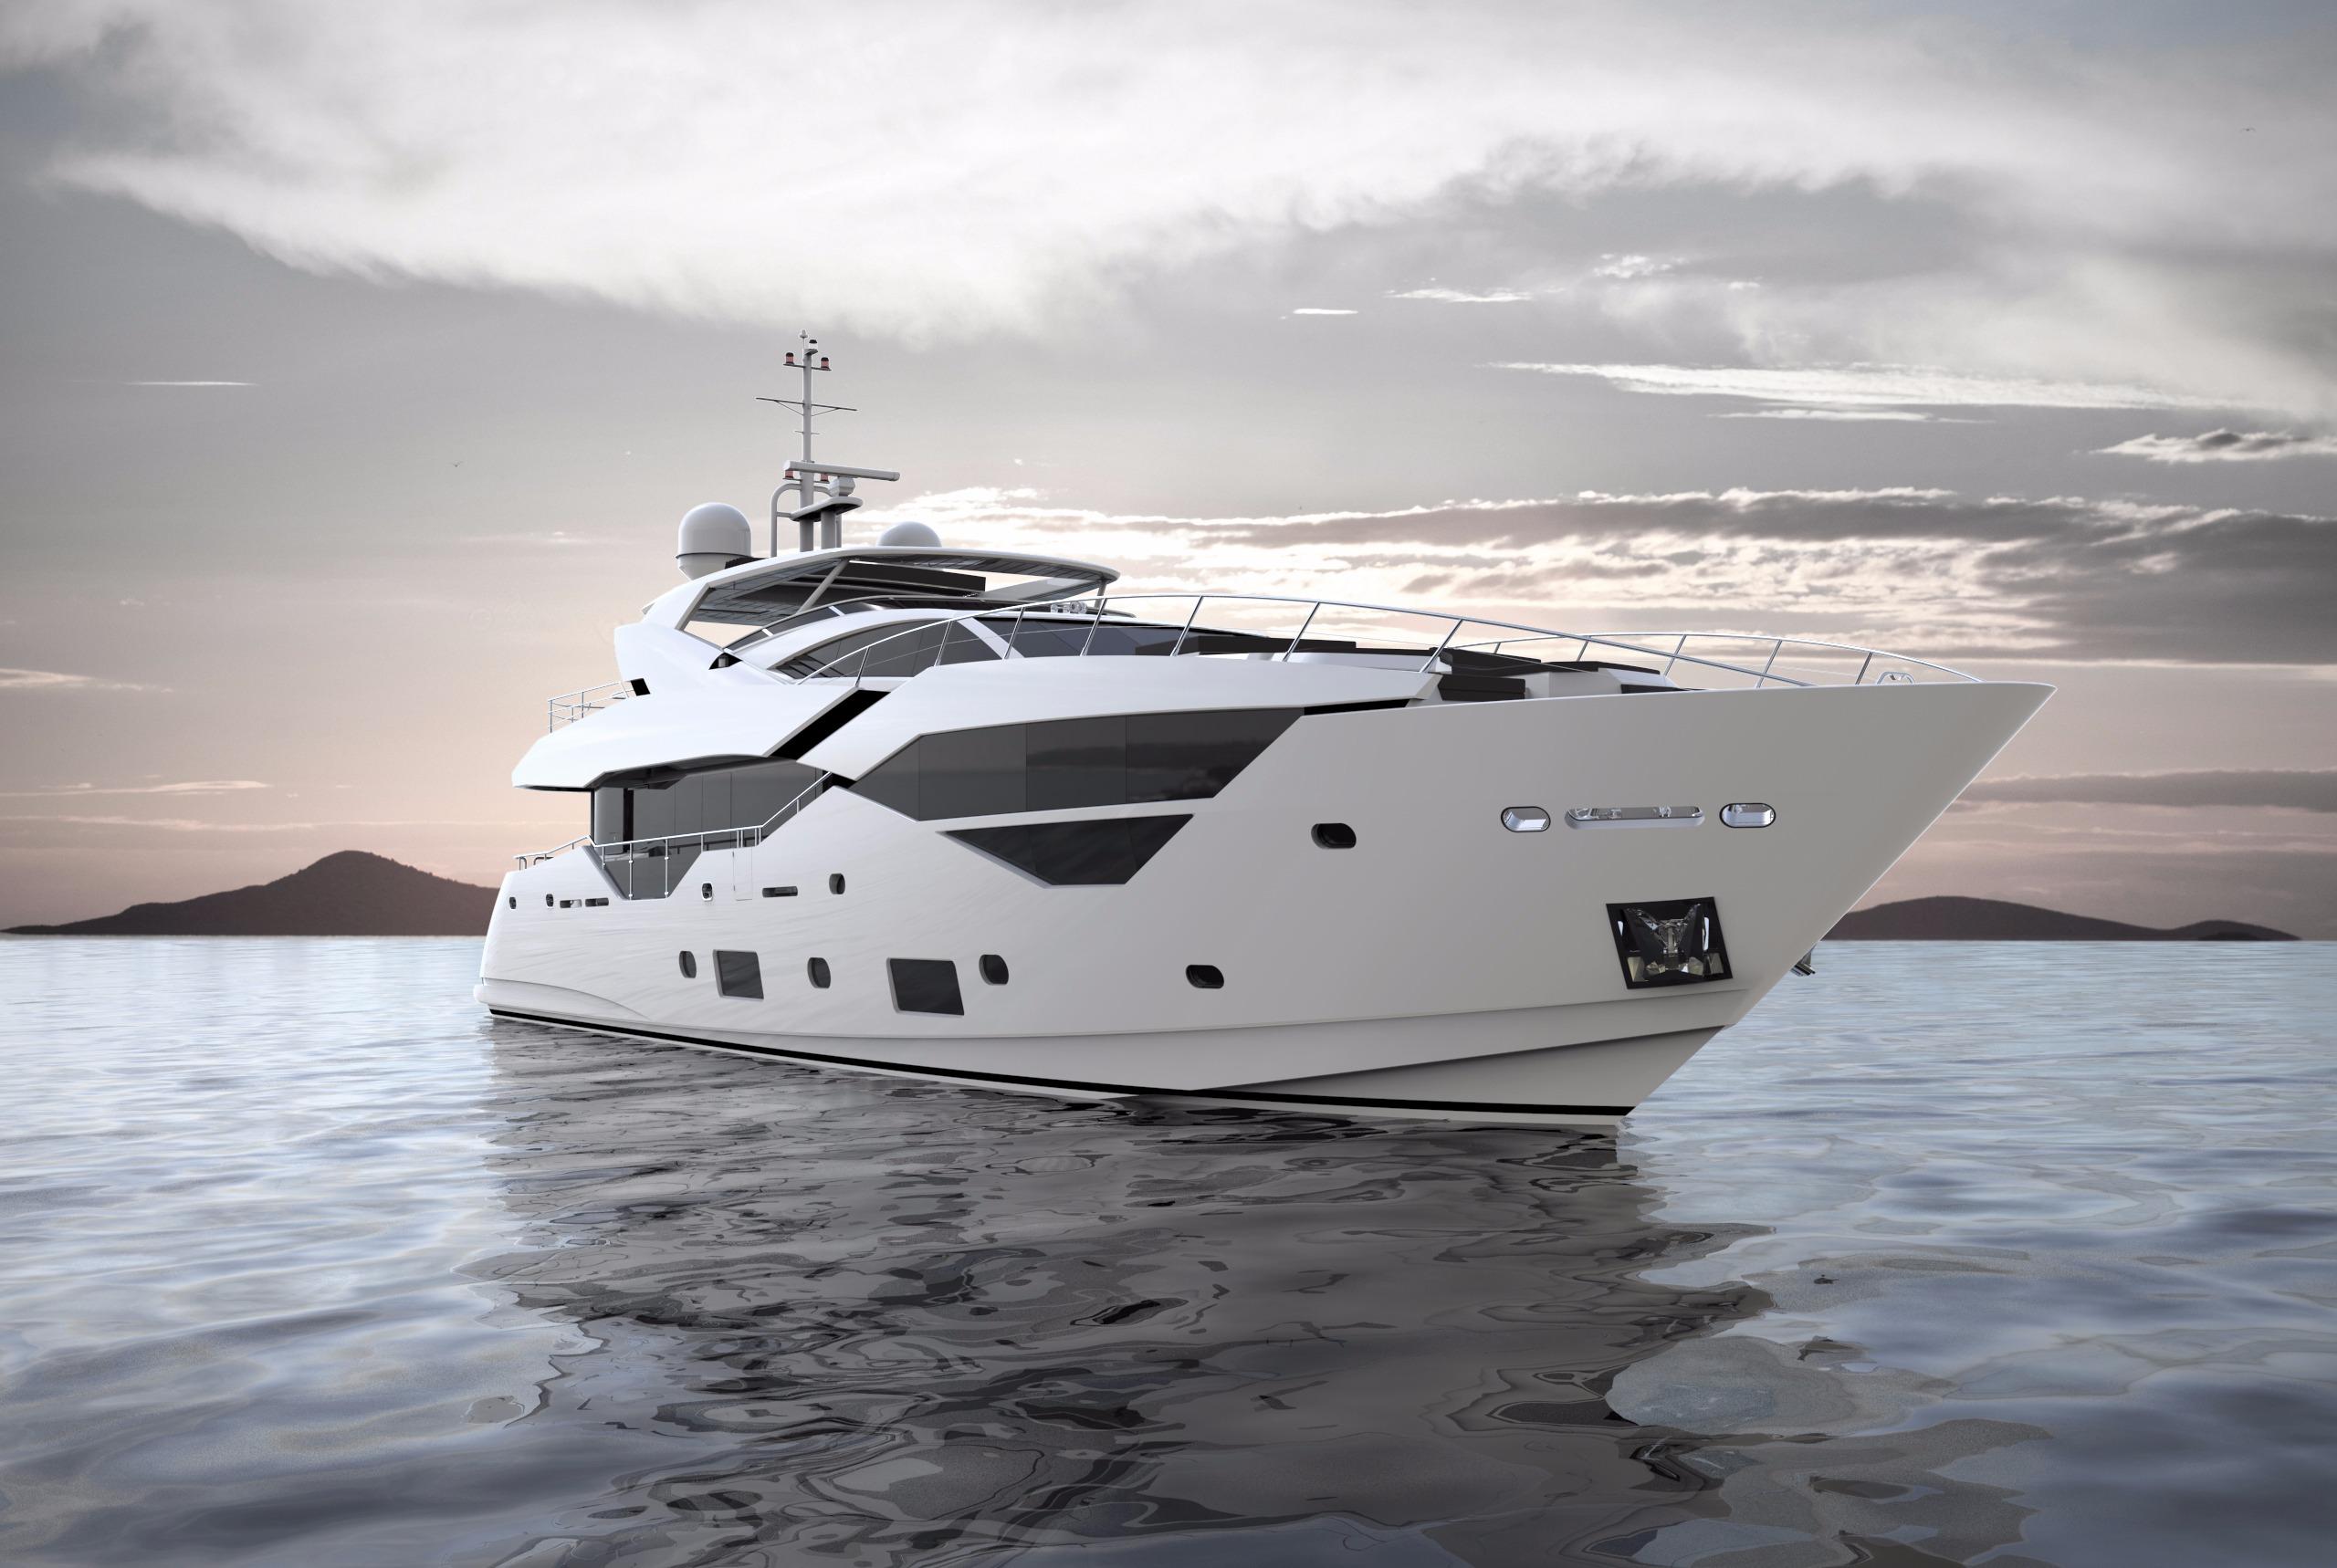  Yacht Photos Pics Manufacturer Provided Image: Sunseeker 116 Yacht